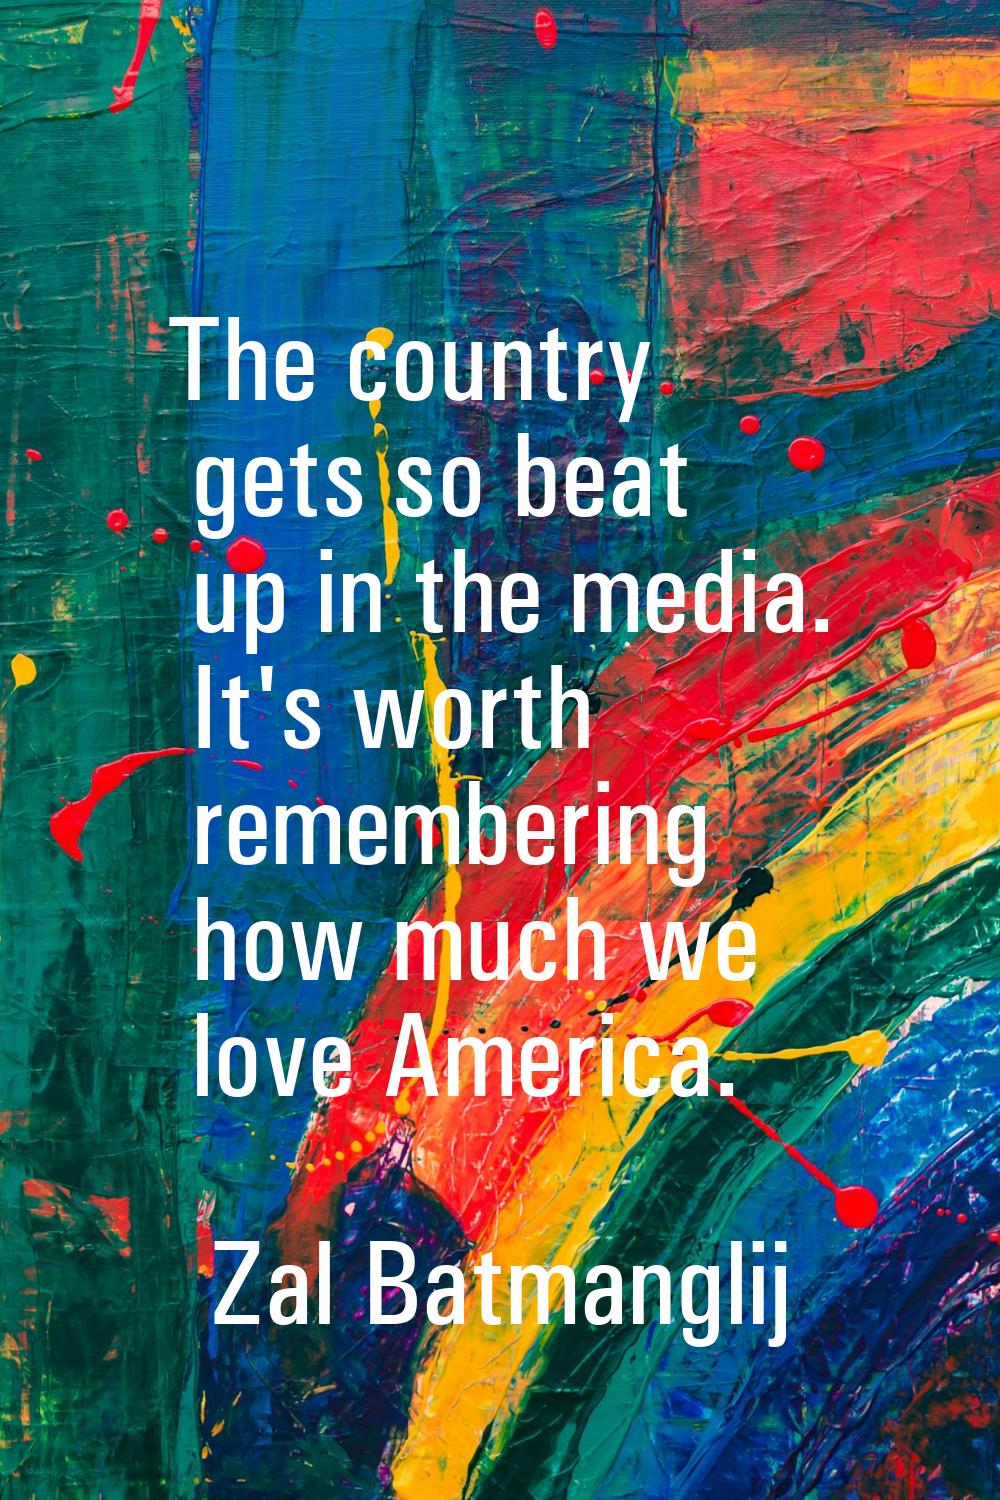 The country gets so beat up in the media. It's worth remembering how much we love America.